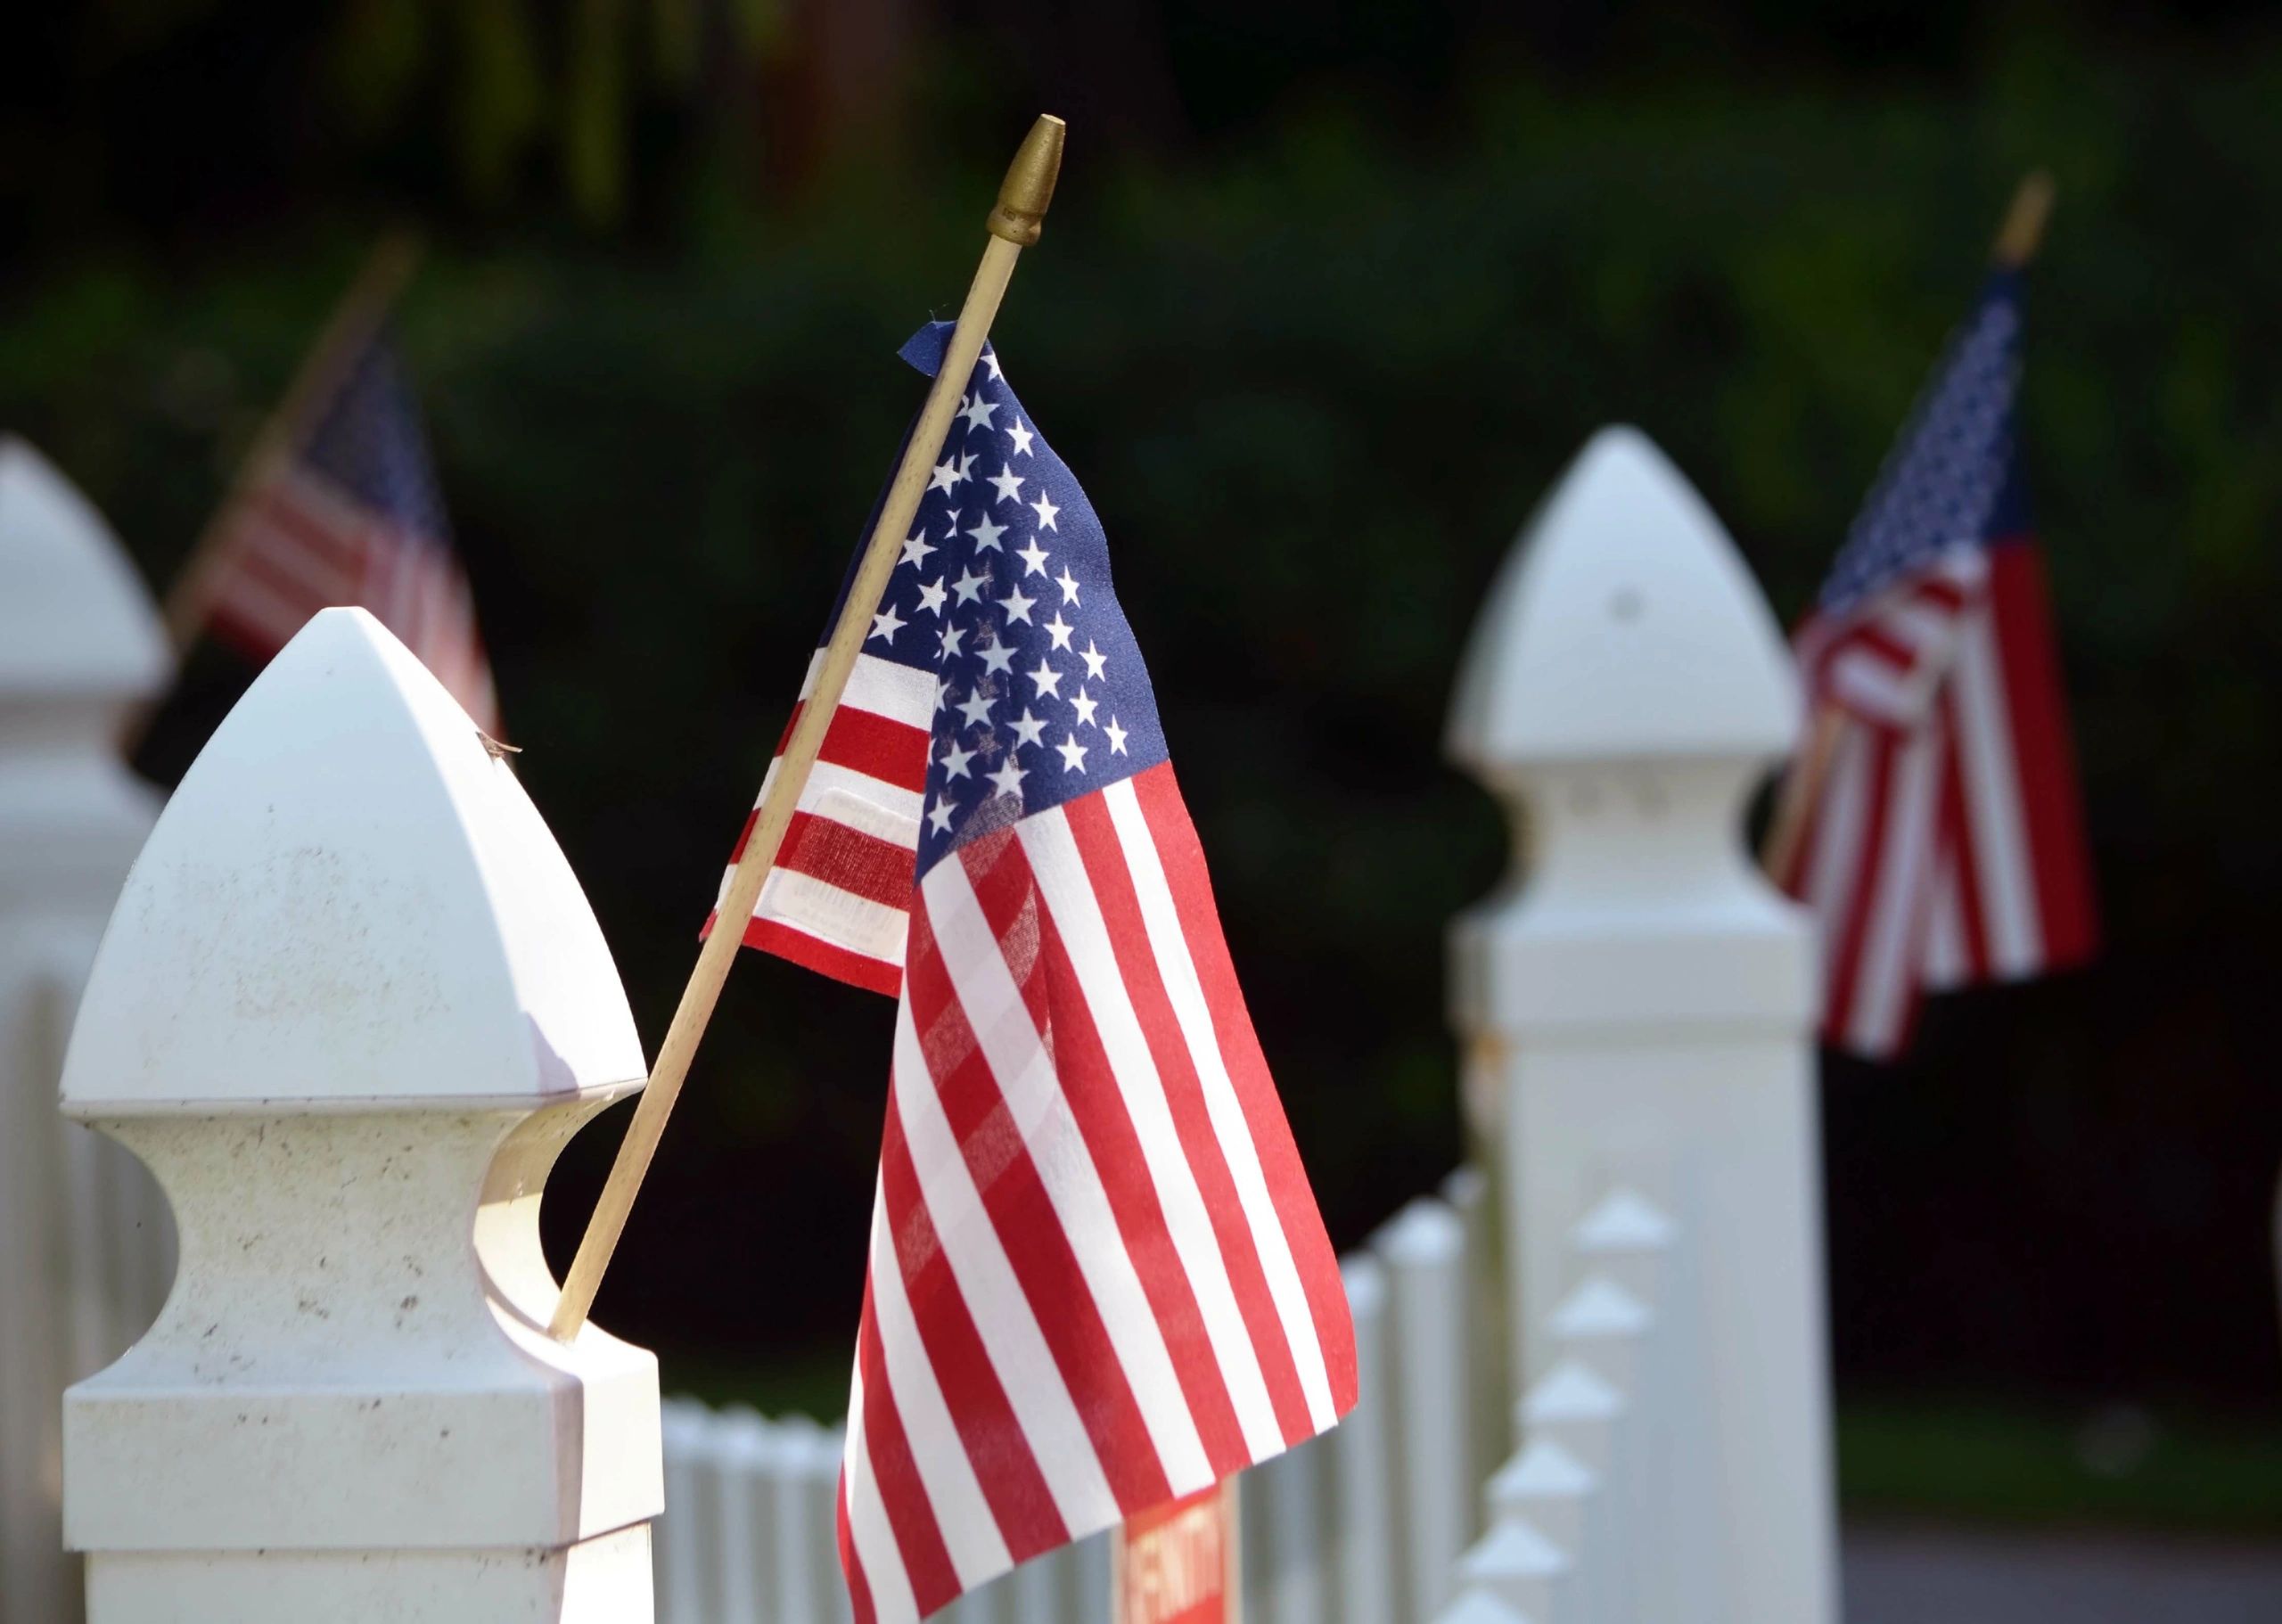 White fence with American flags on each fence post.